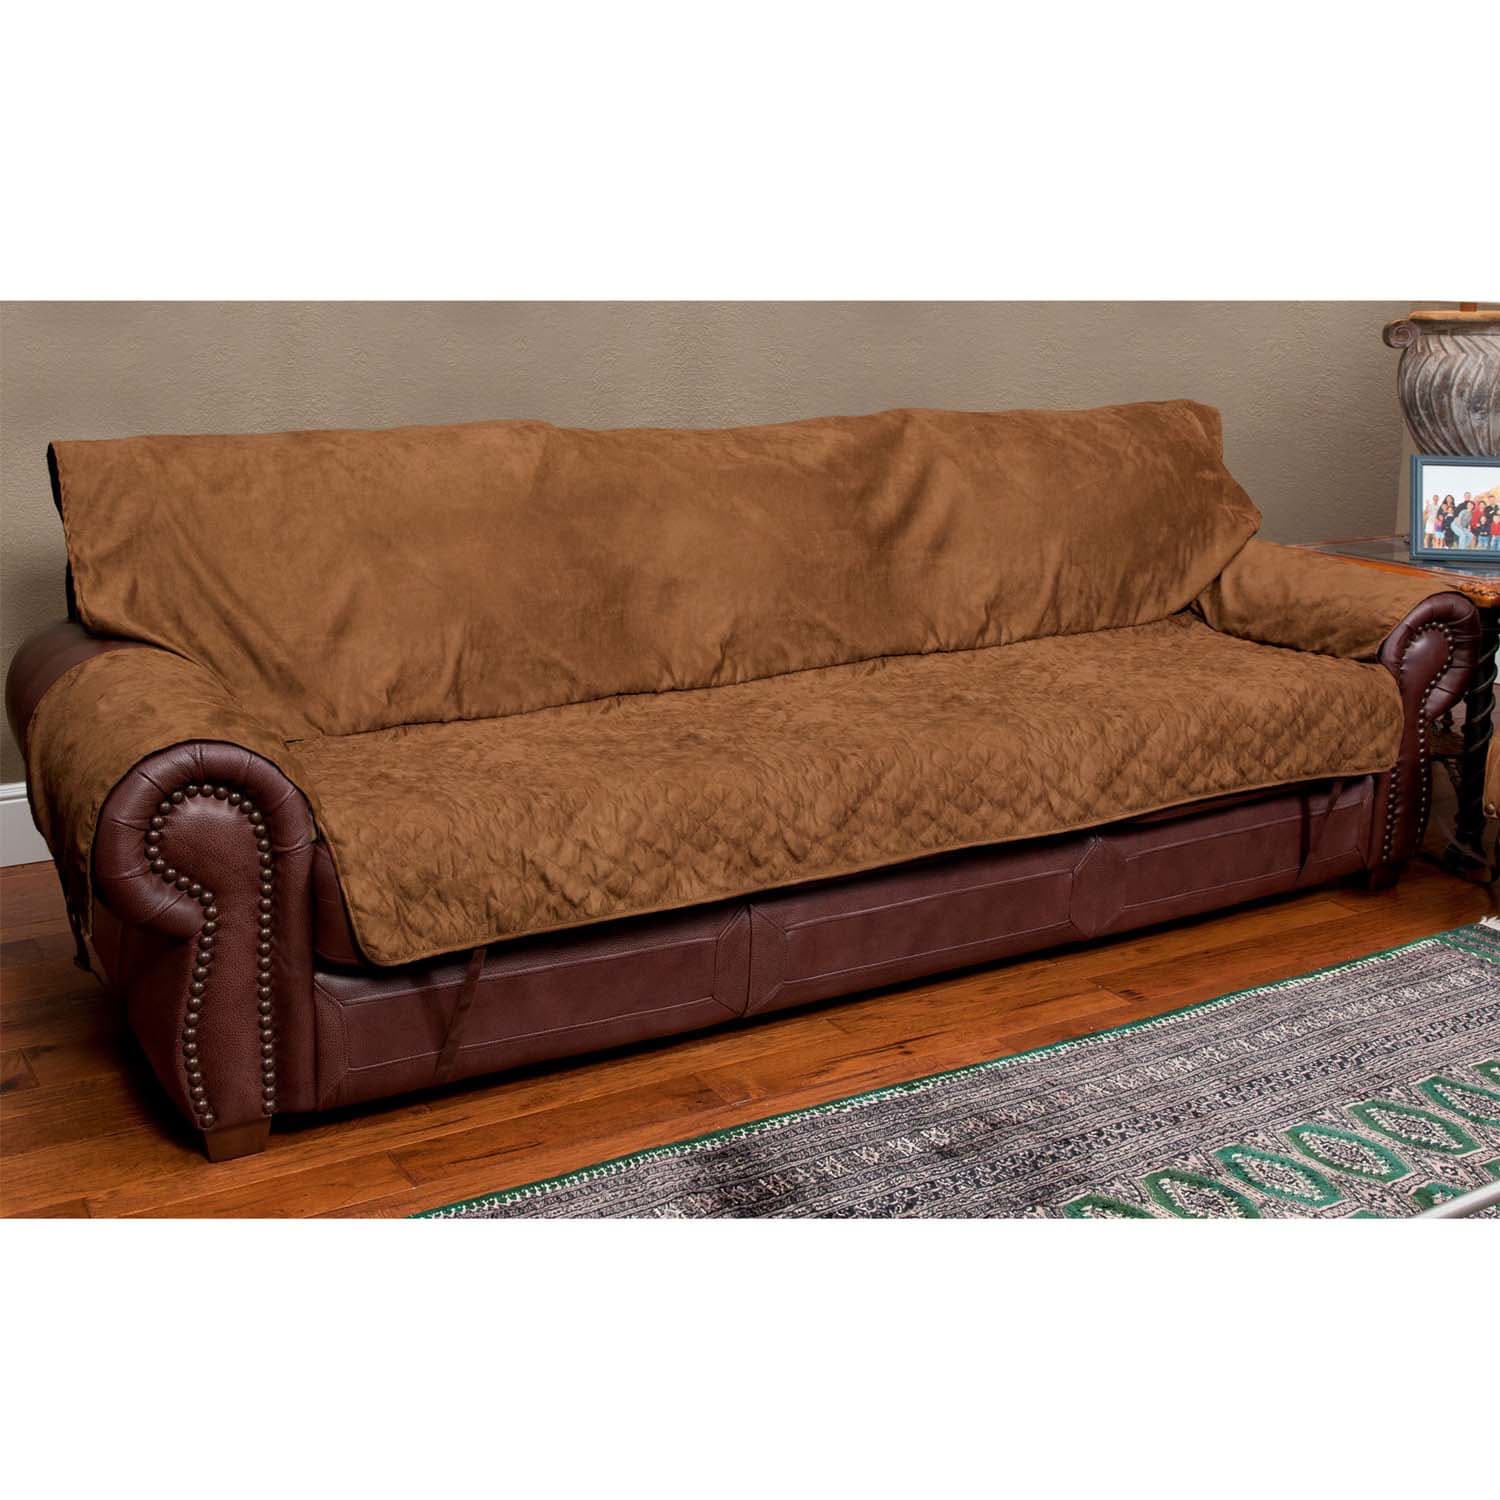 Solvit Sofa Full Coverage Cocoa, Leather Couch Covers For Pets